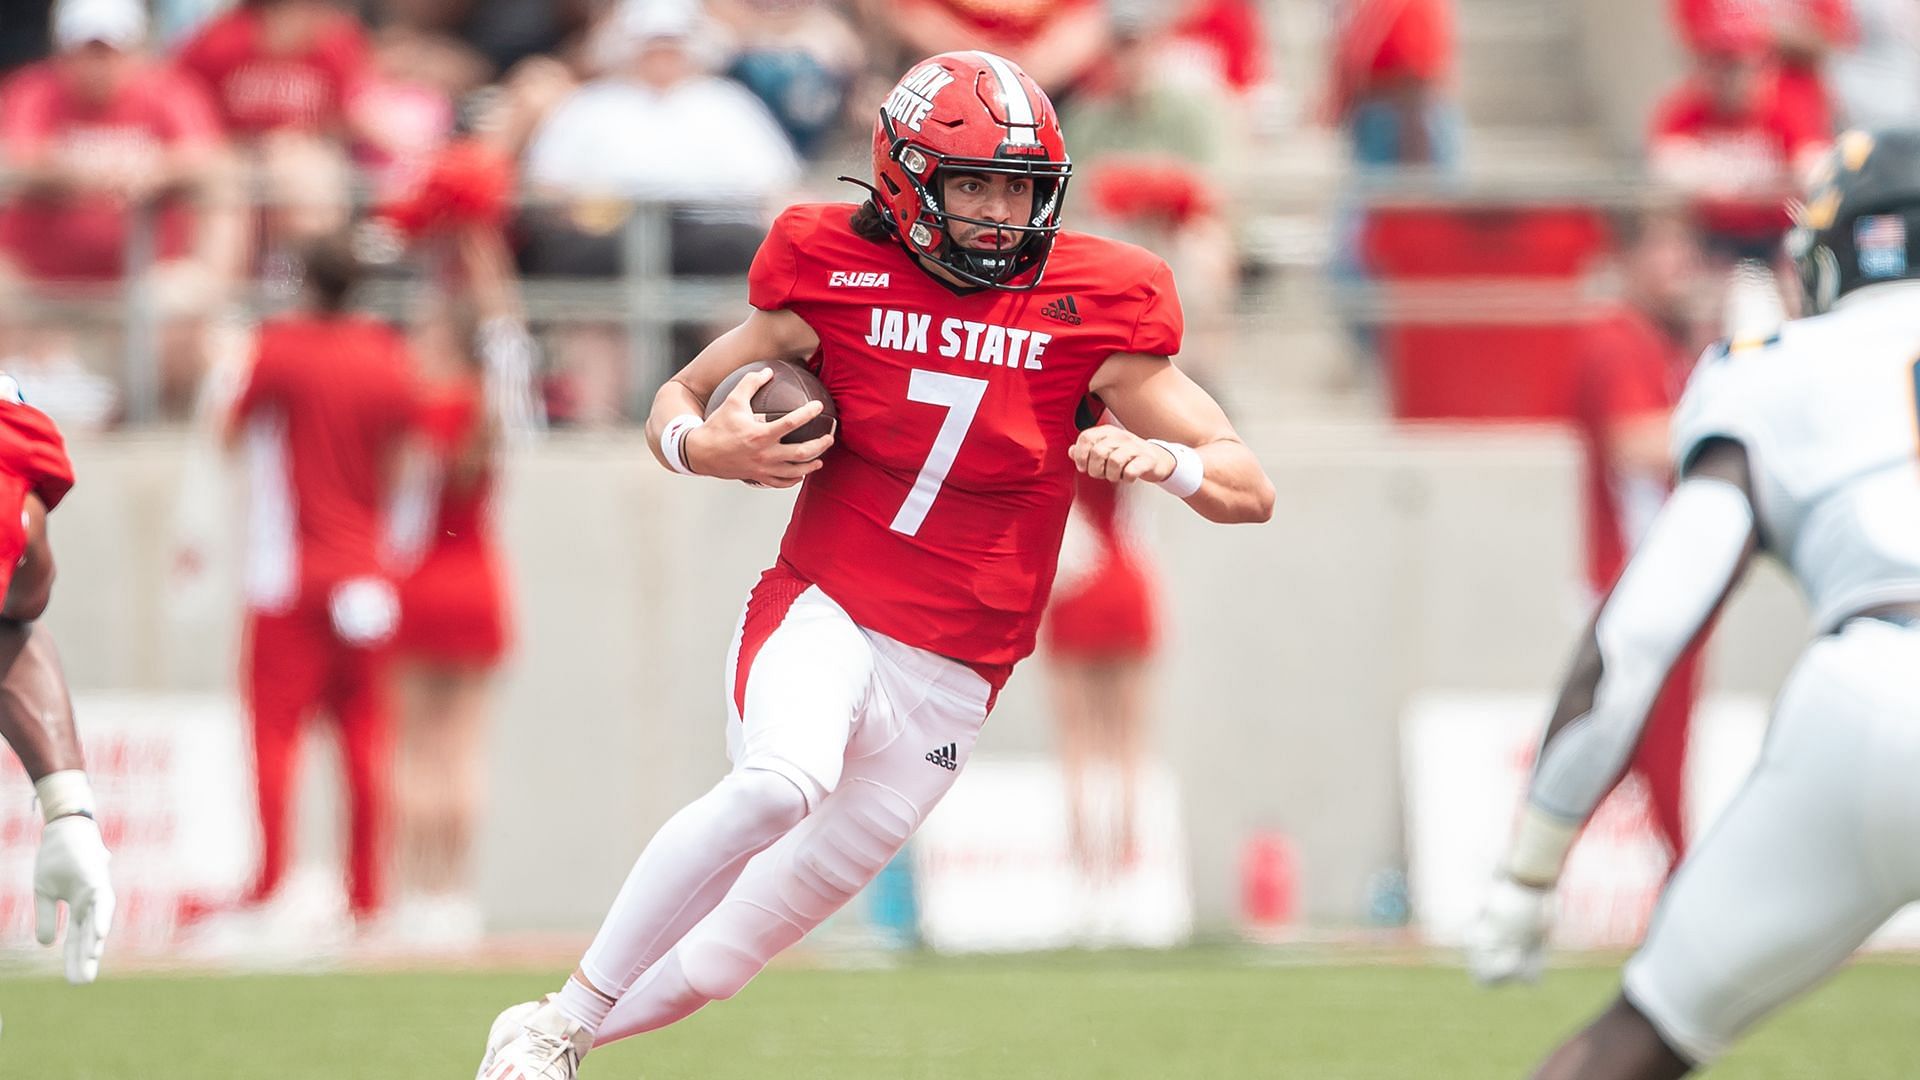 Jacksonville State meets Louisiana for the R+L Carriers New Orleans Bowl